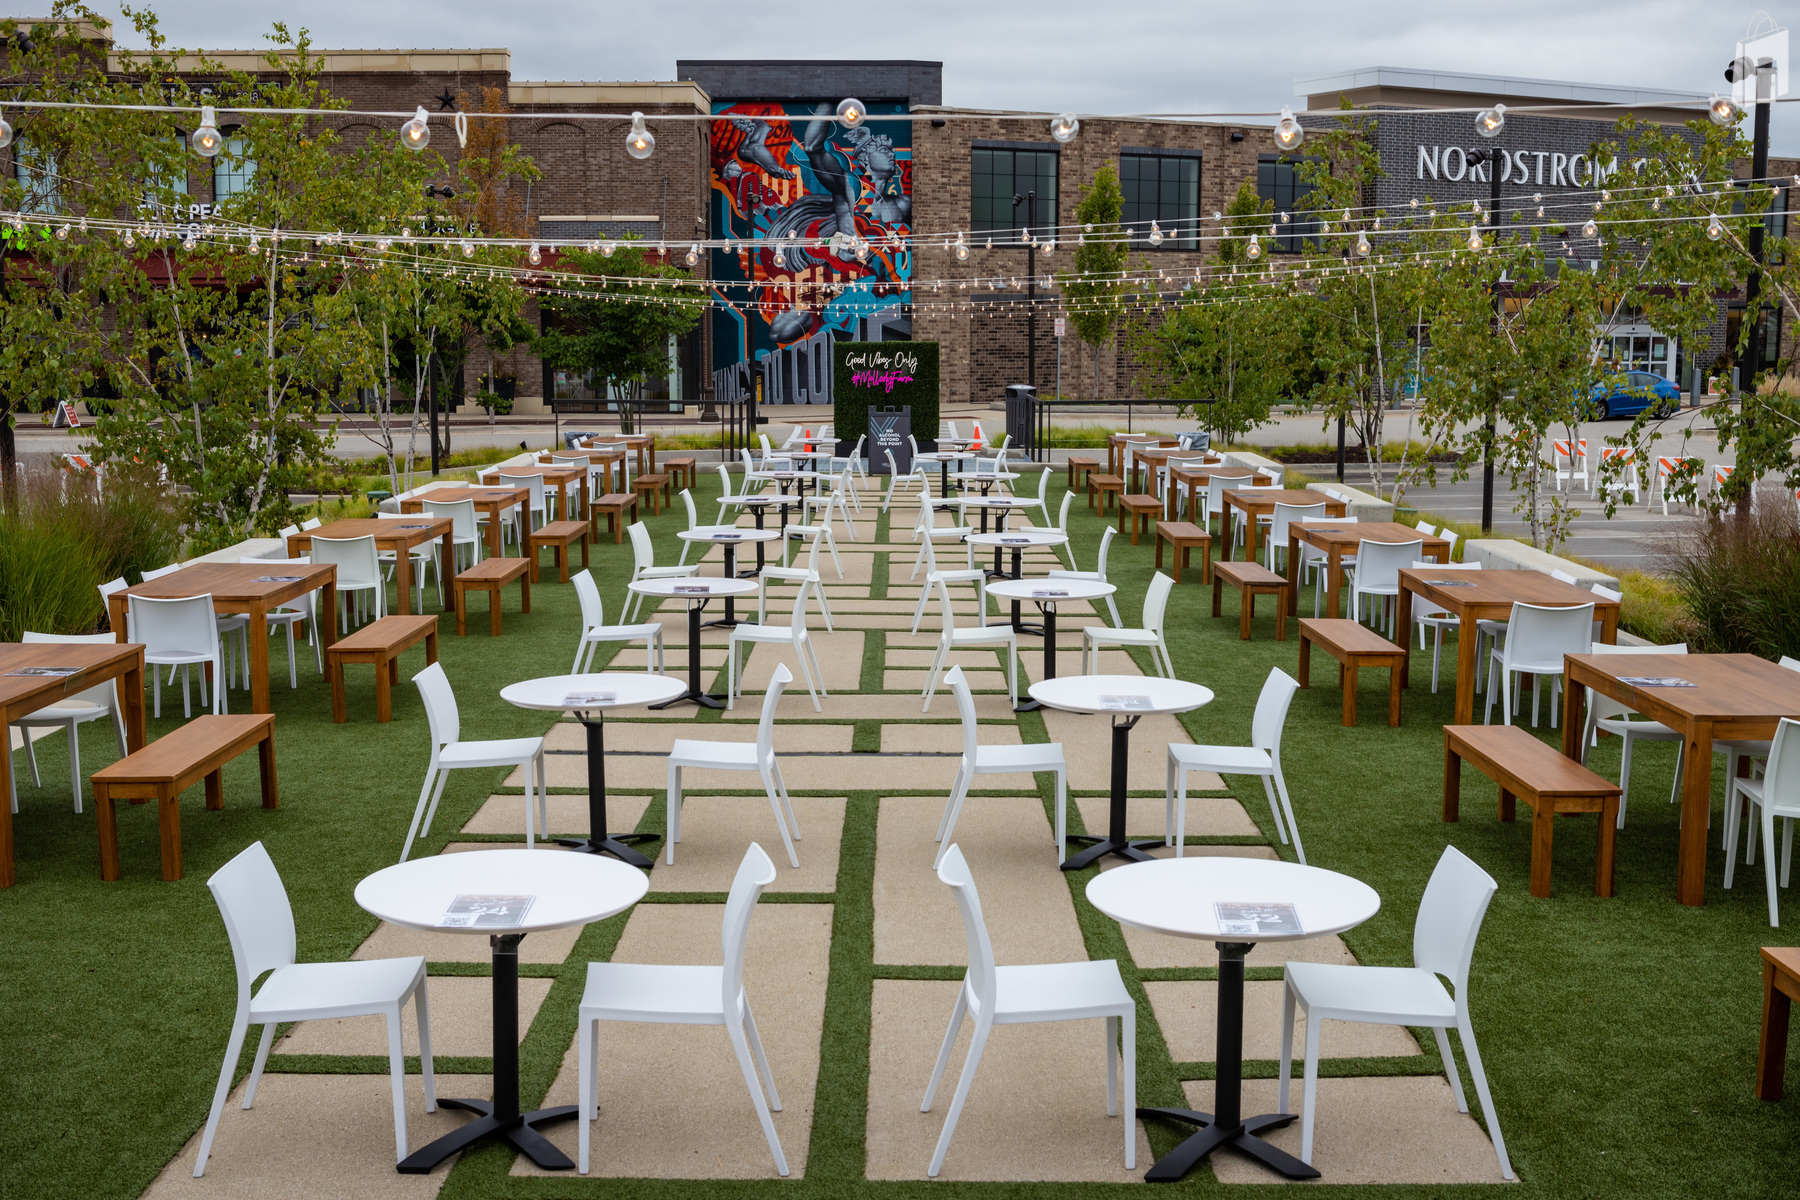 Outdoor space perfect for your event/activation in Vernon Hills